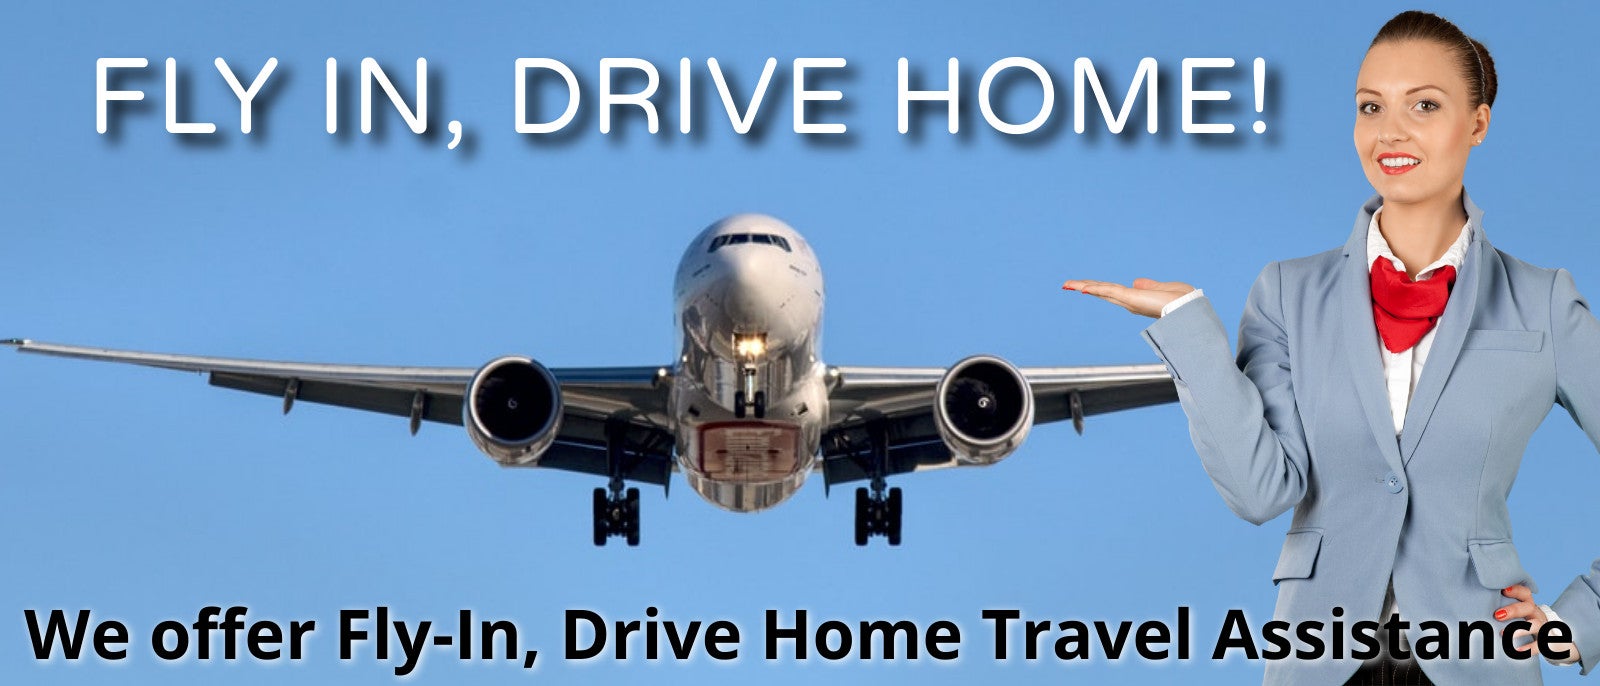 Fly in, drive home! Click to learn more